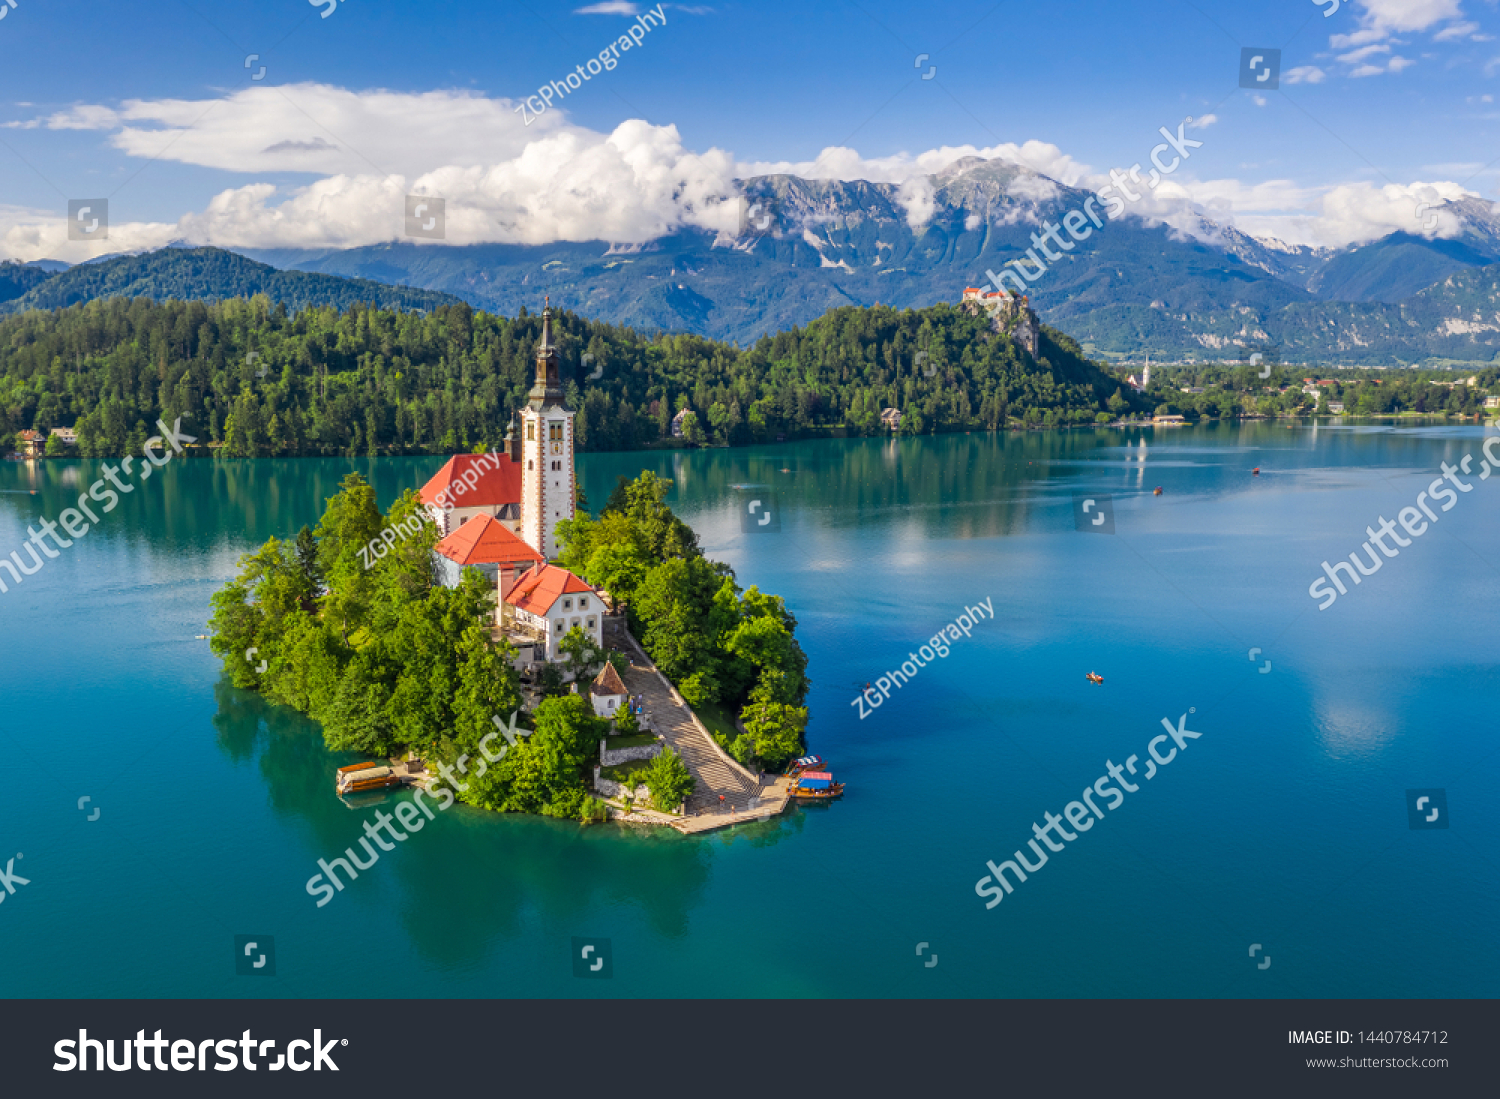 Lake Bled, Slovenia - Beautiful aerial view of Lake Bled (Blejsko Jezero) with the Pilgrimage Church of the Assumption of Maria on a small island and Bled Castle and Julian Alps at backgroud at summer #1440784712